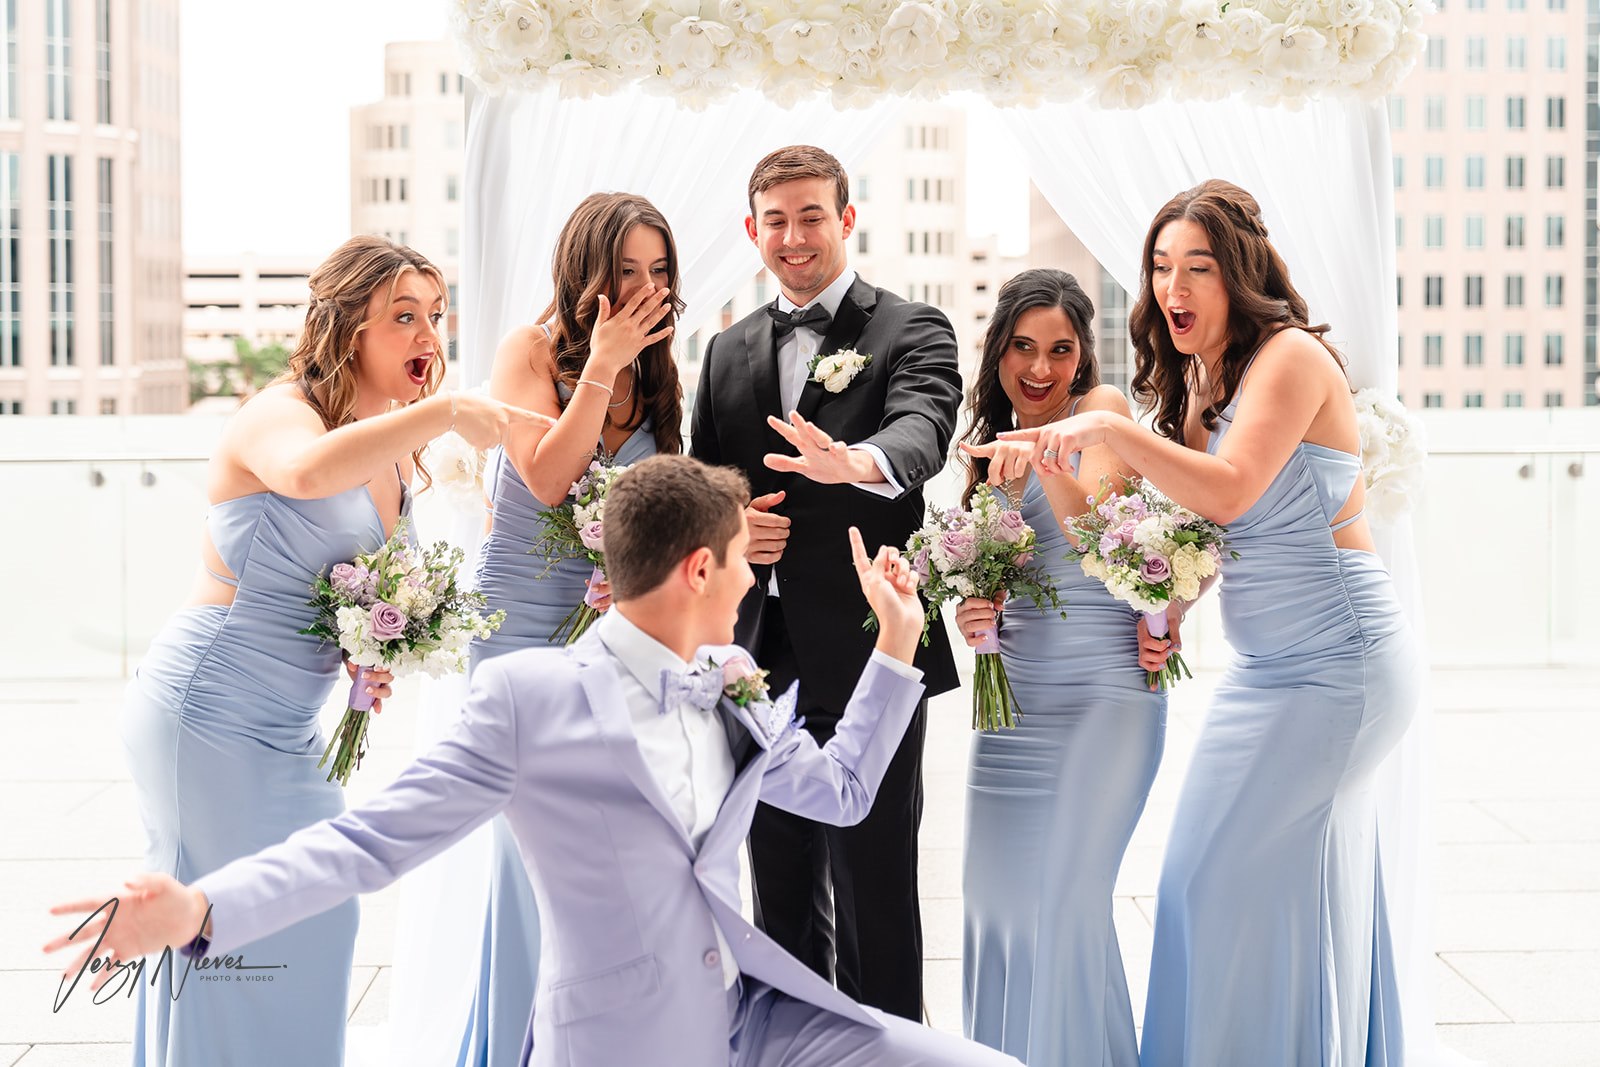 Humorous photograph of the groom at the altar, with bridesmaids pointing in surprise at his wedding ring.